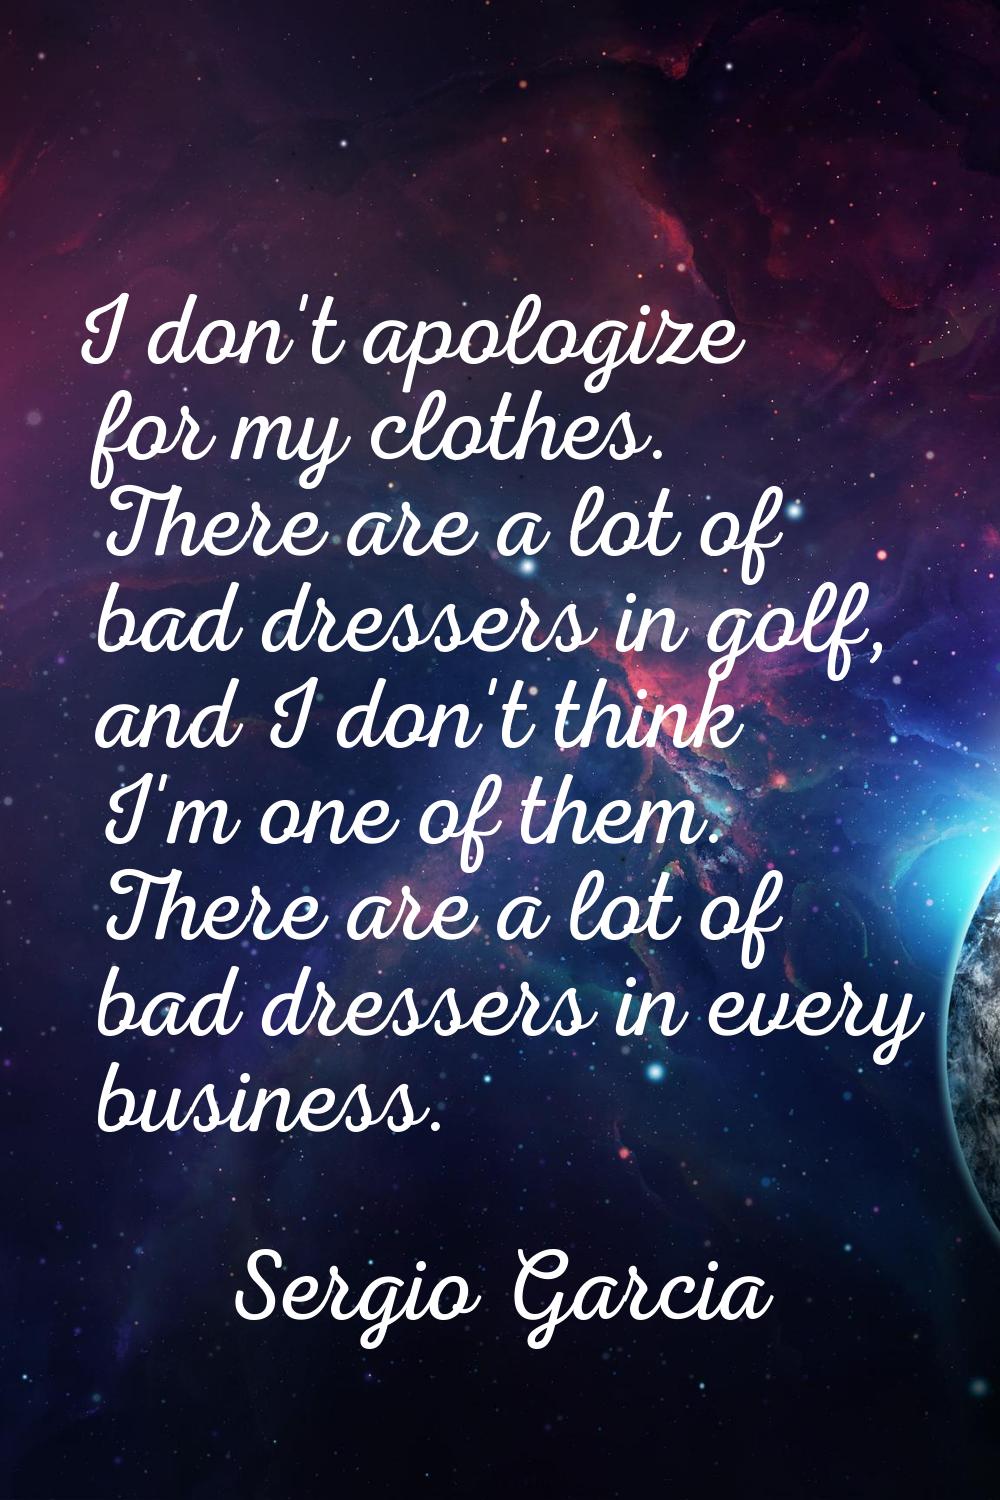 I don't apologize for my clothes. There are a lot of bad dressers in golf, and I don't think I'm on